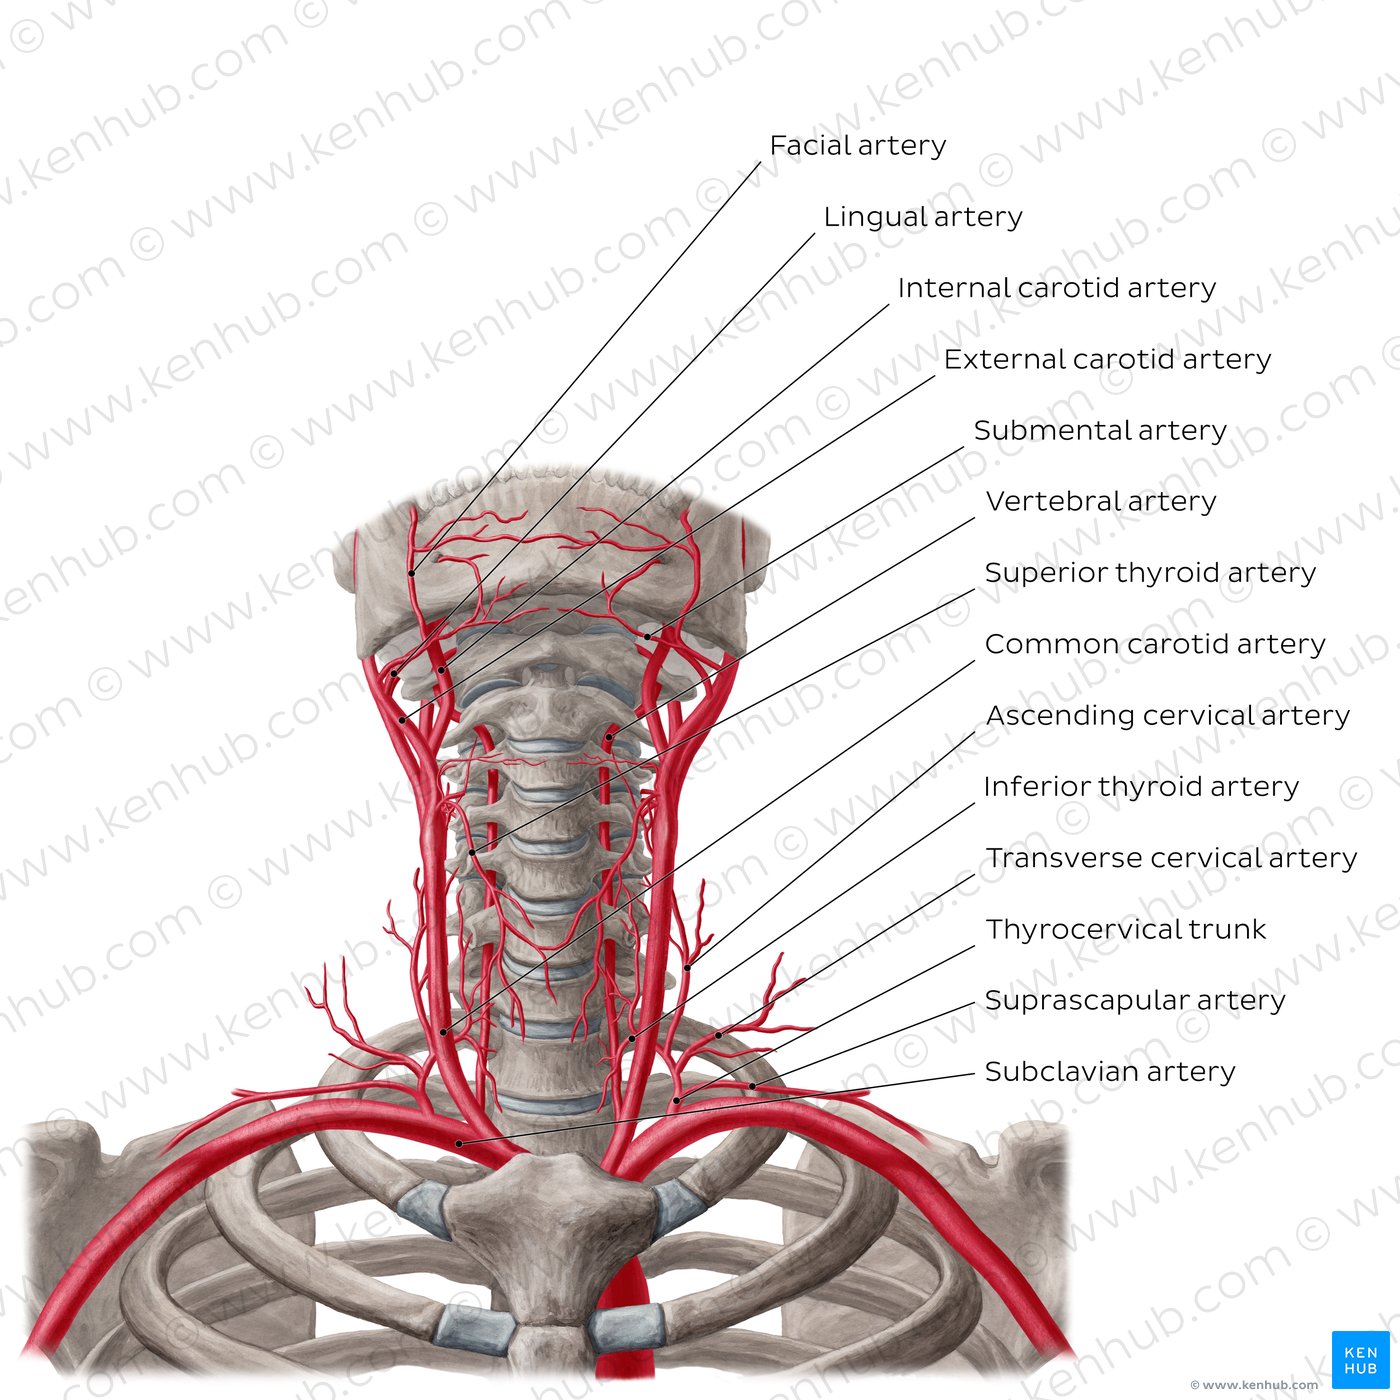 Anterior view of the mandible, cervical spine and ribs focusing on the arteries of the neck.